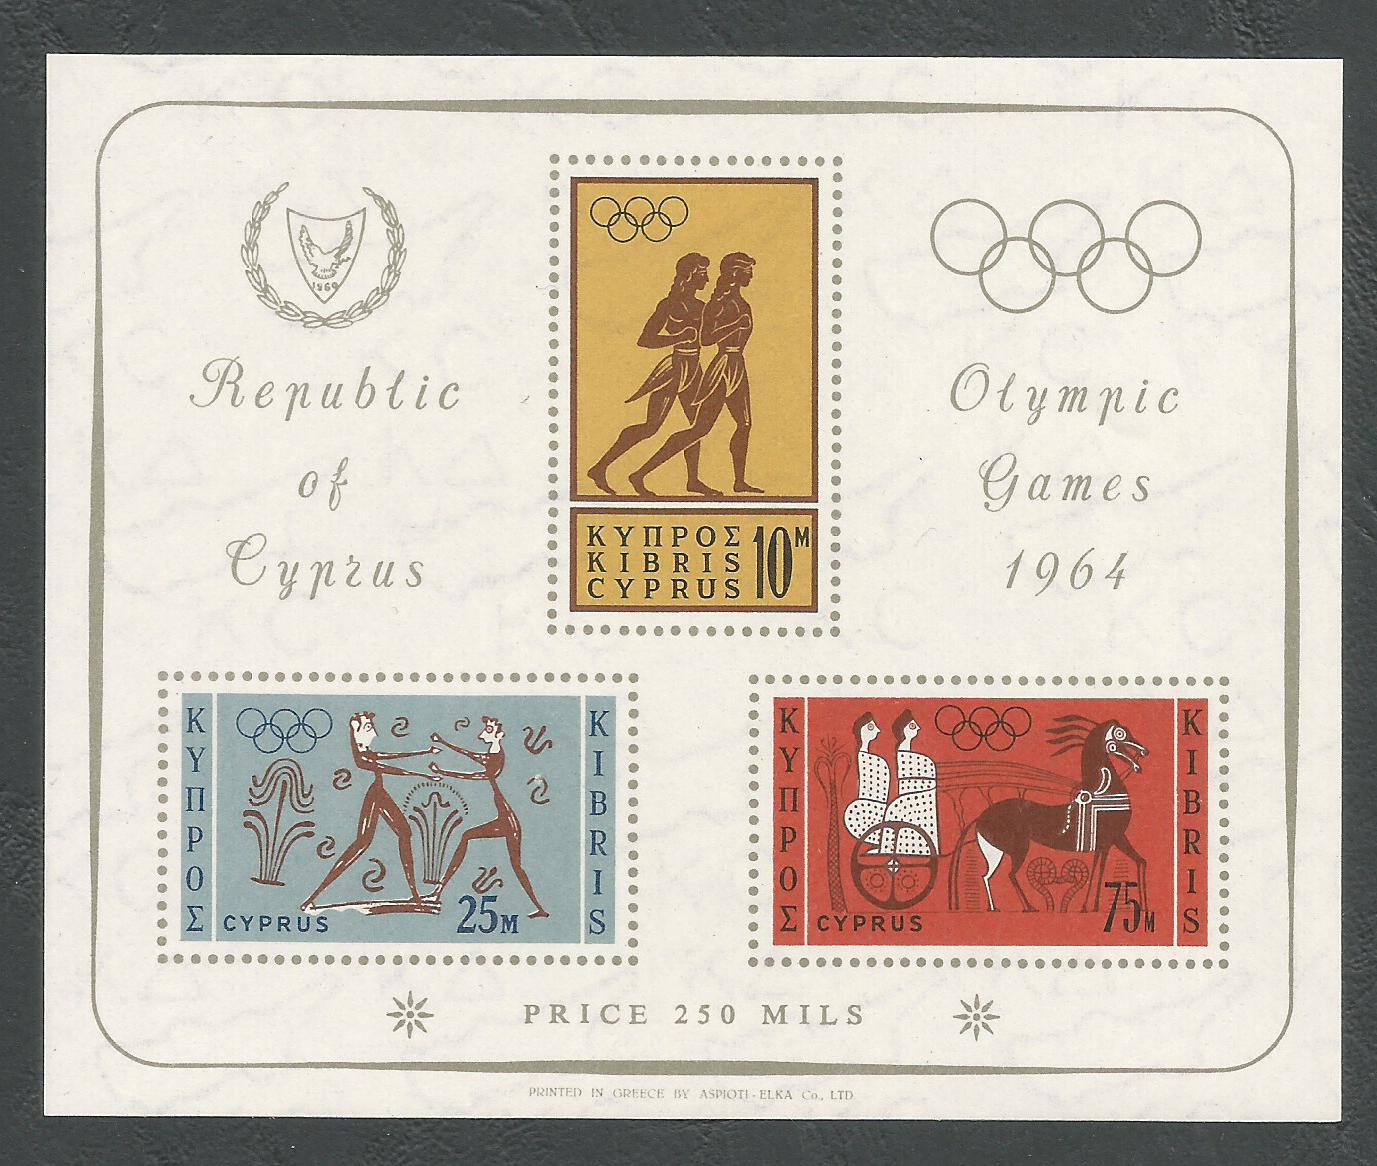 Cyprus Stamps SG 248a MS 1964 Tokyo Olympic games - Type 1 Normal watermark